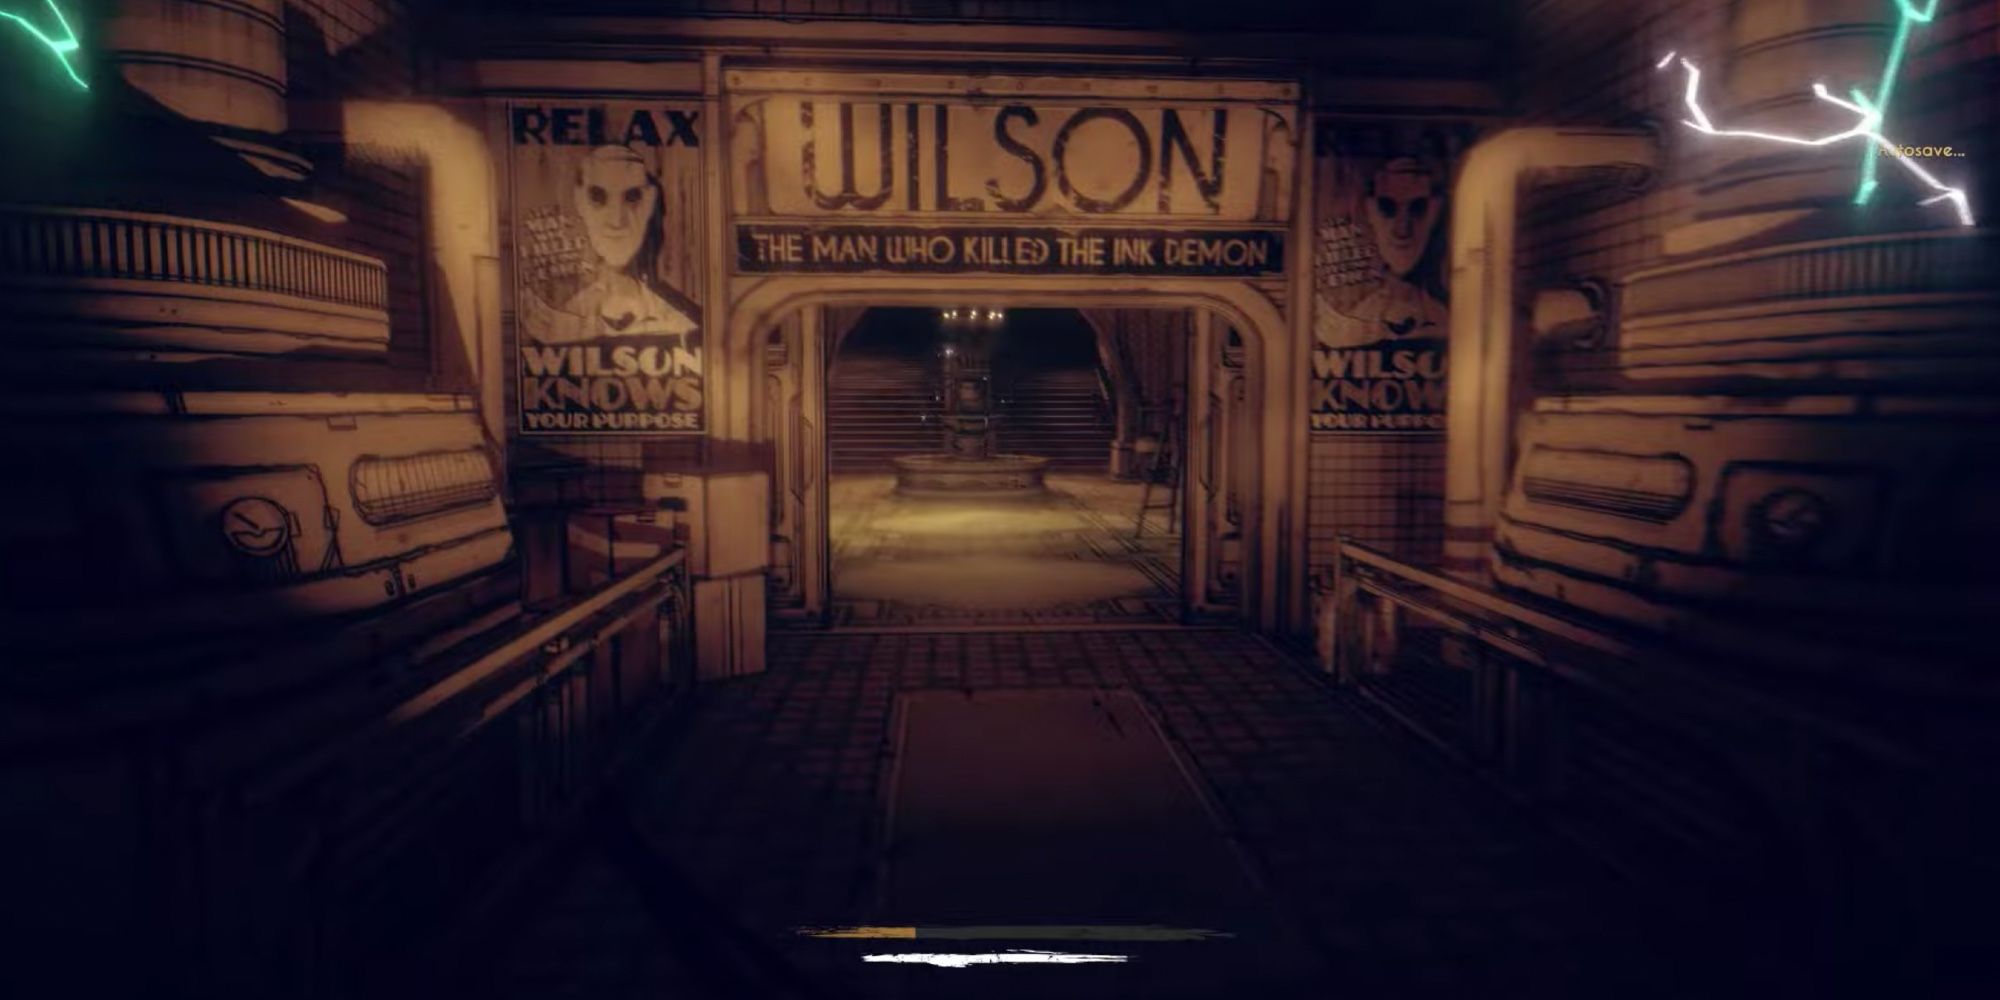 Player looks around to find meaning in the artwork hidden within the game